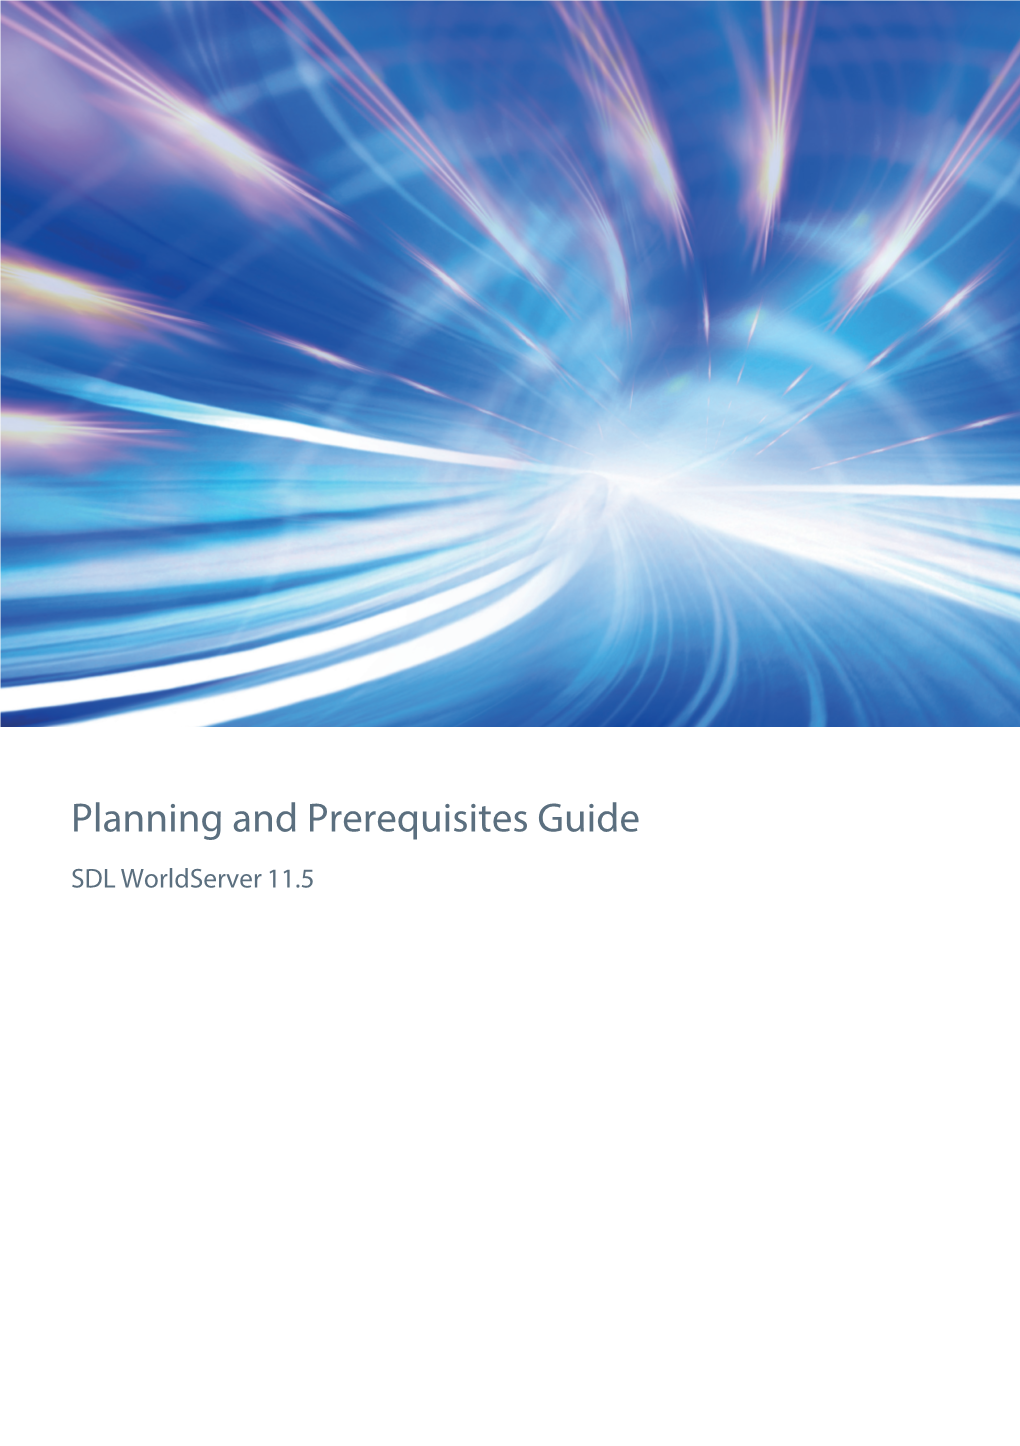 The Worldserver 11.5 Planning and Prerequisites Guide